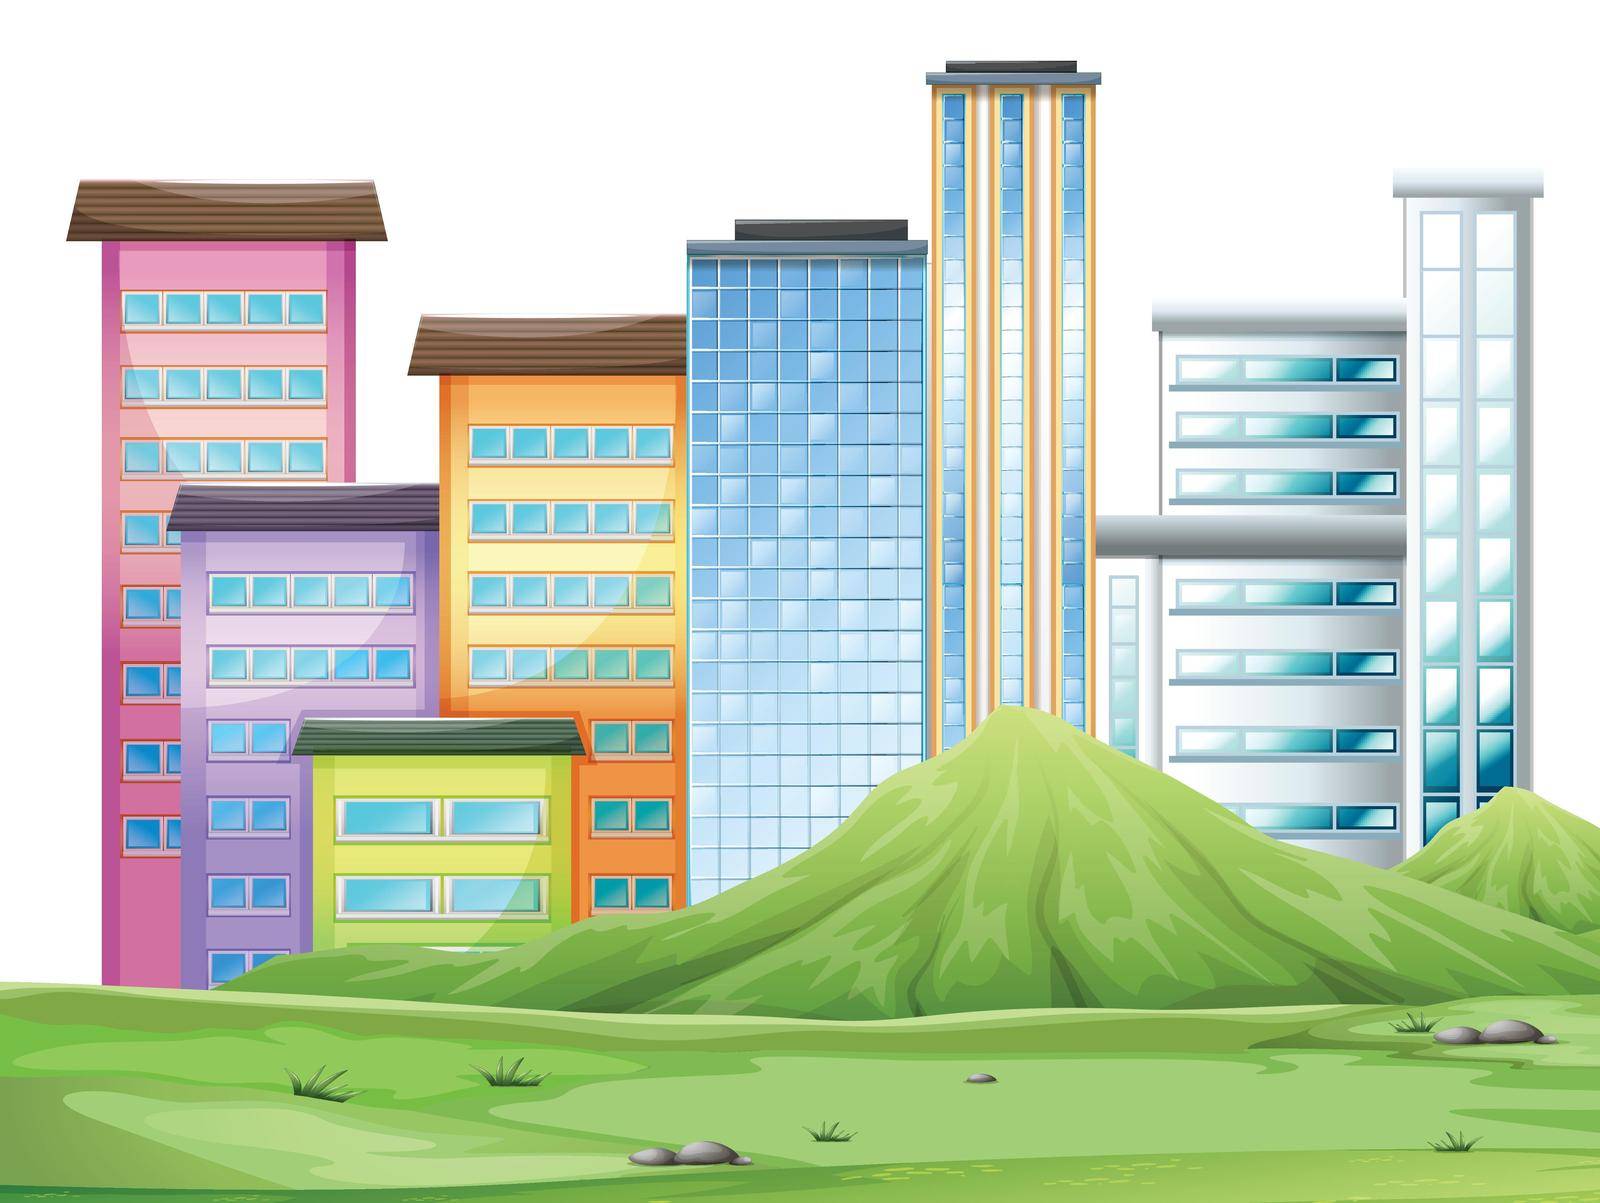 Buildings in the town illustration